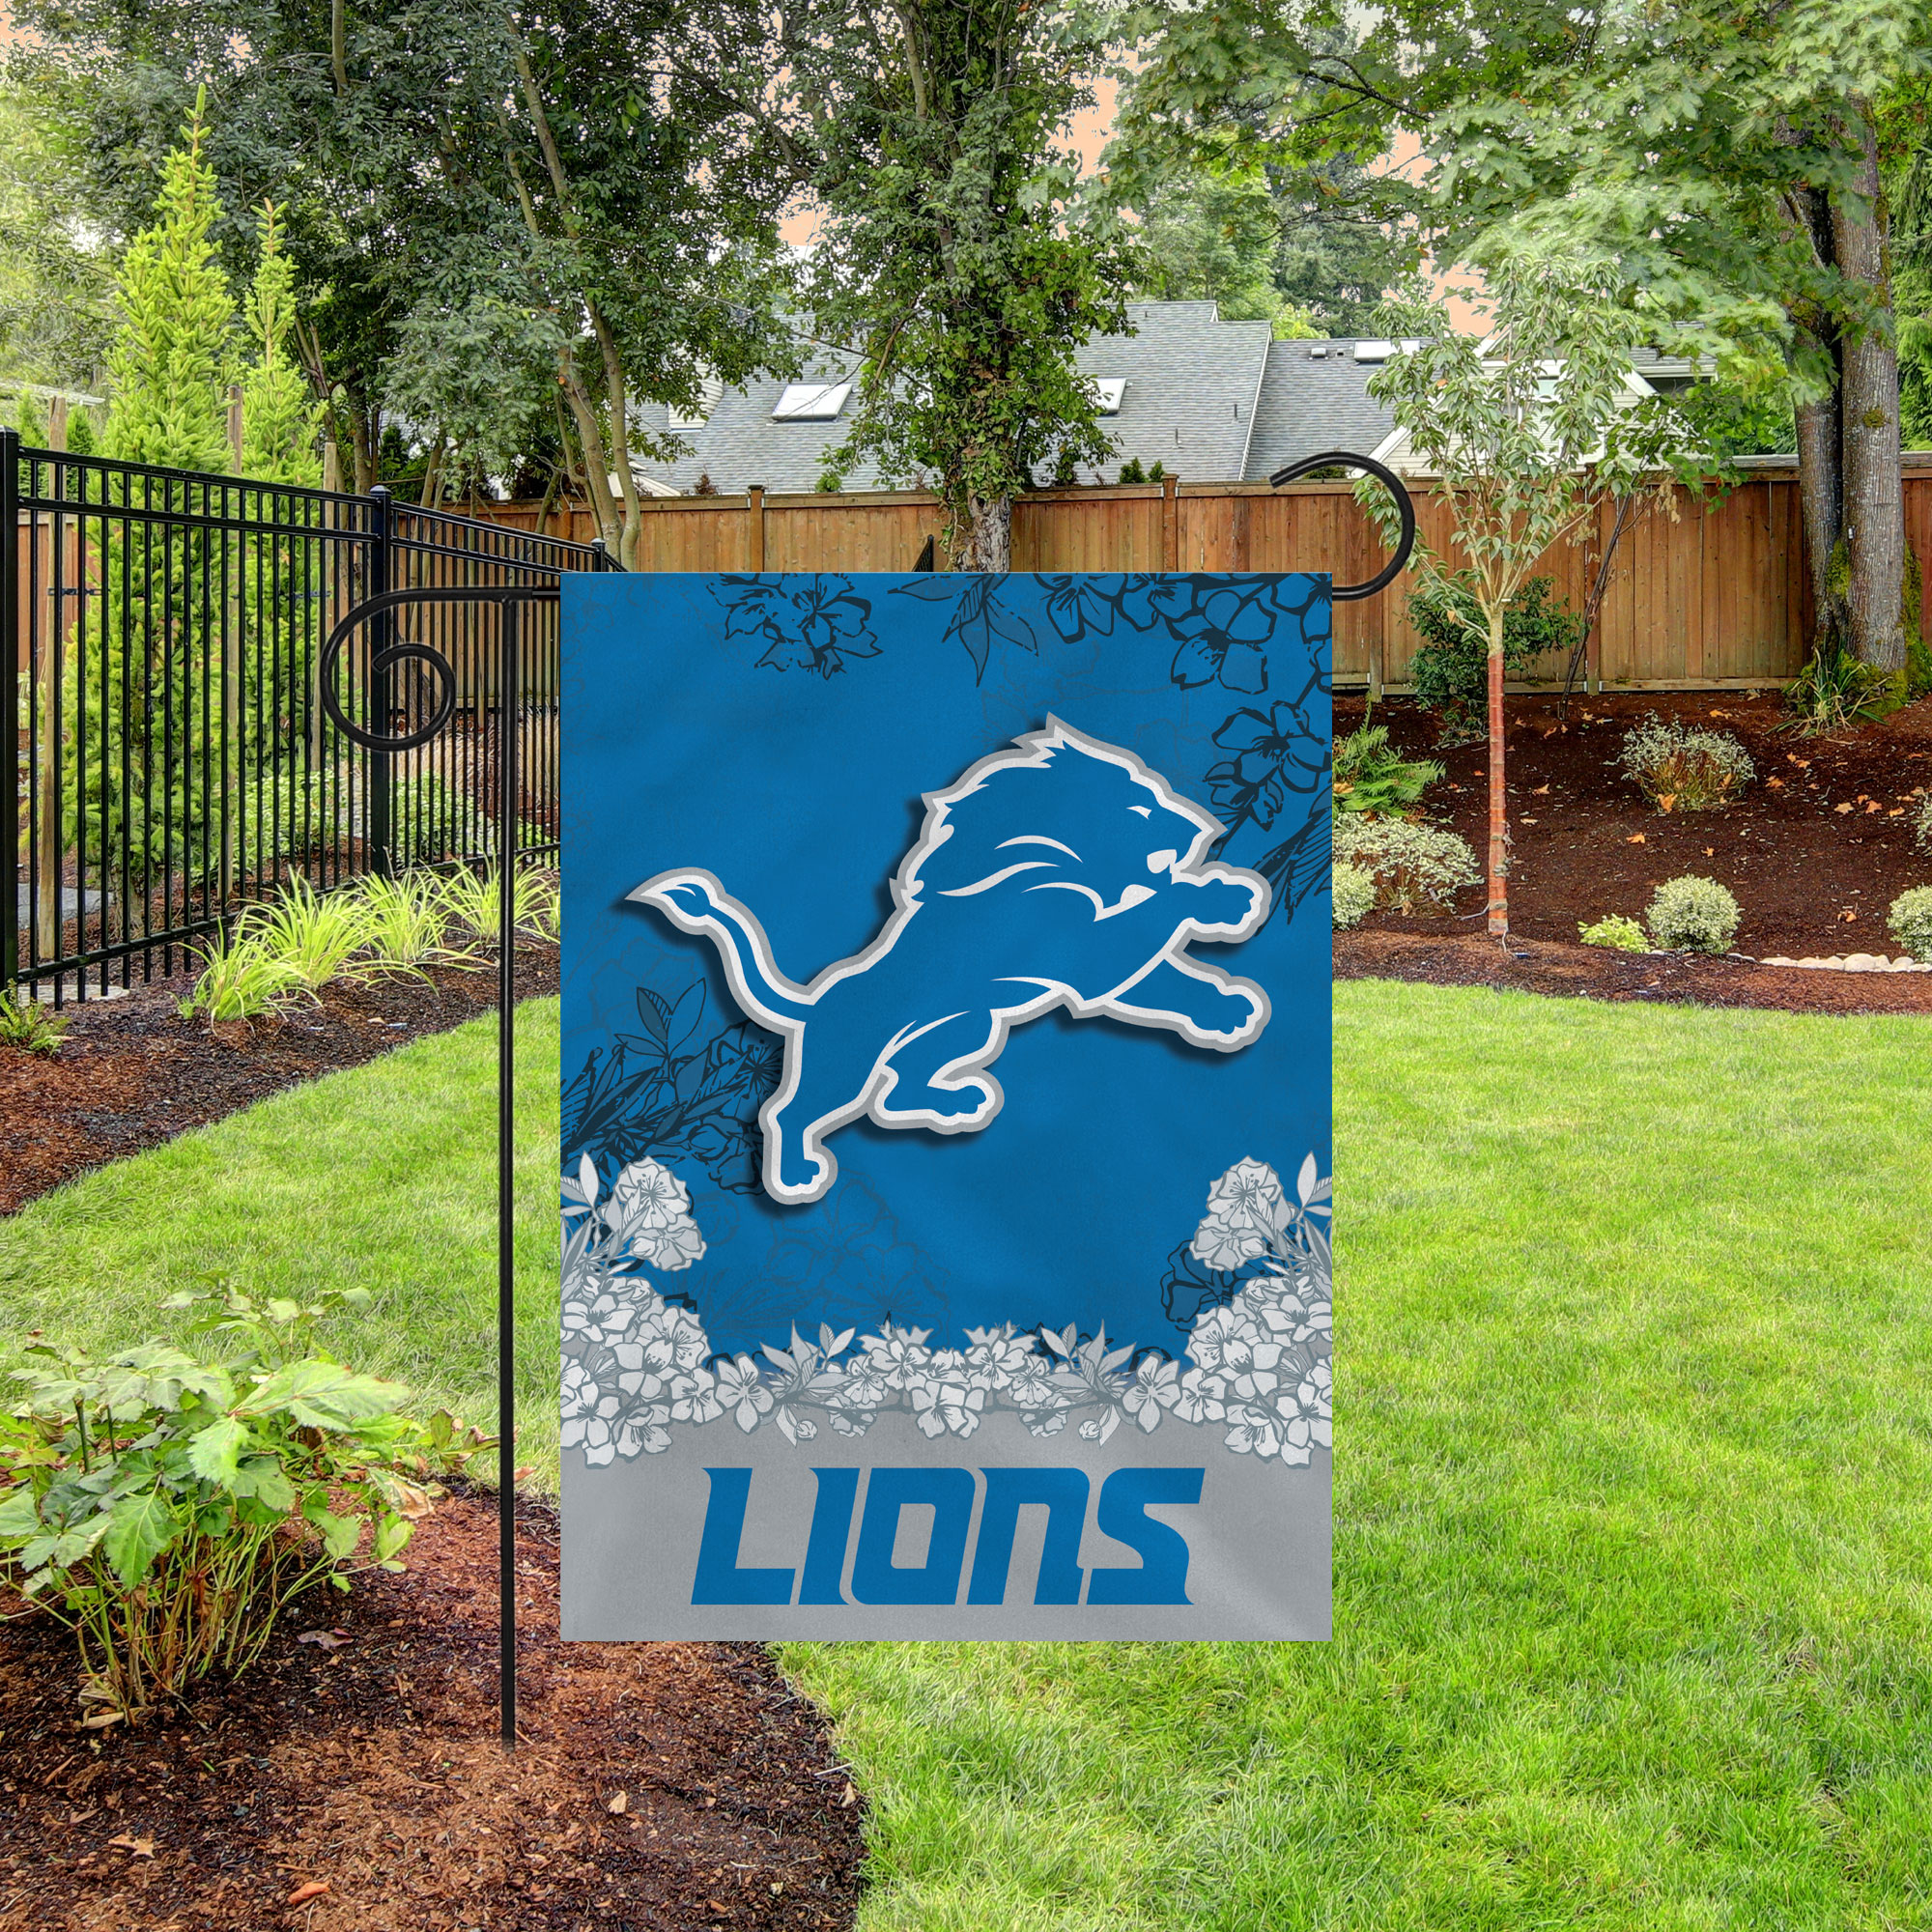 Rico Industries NFL Football Detroit Lions Primary Double Sided Garden Flag